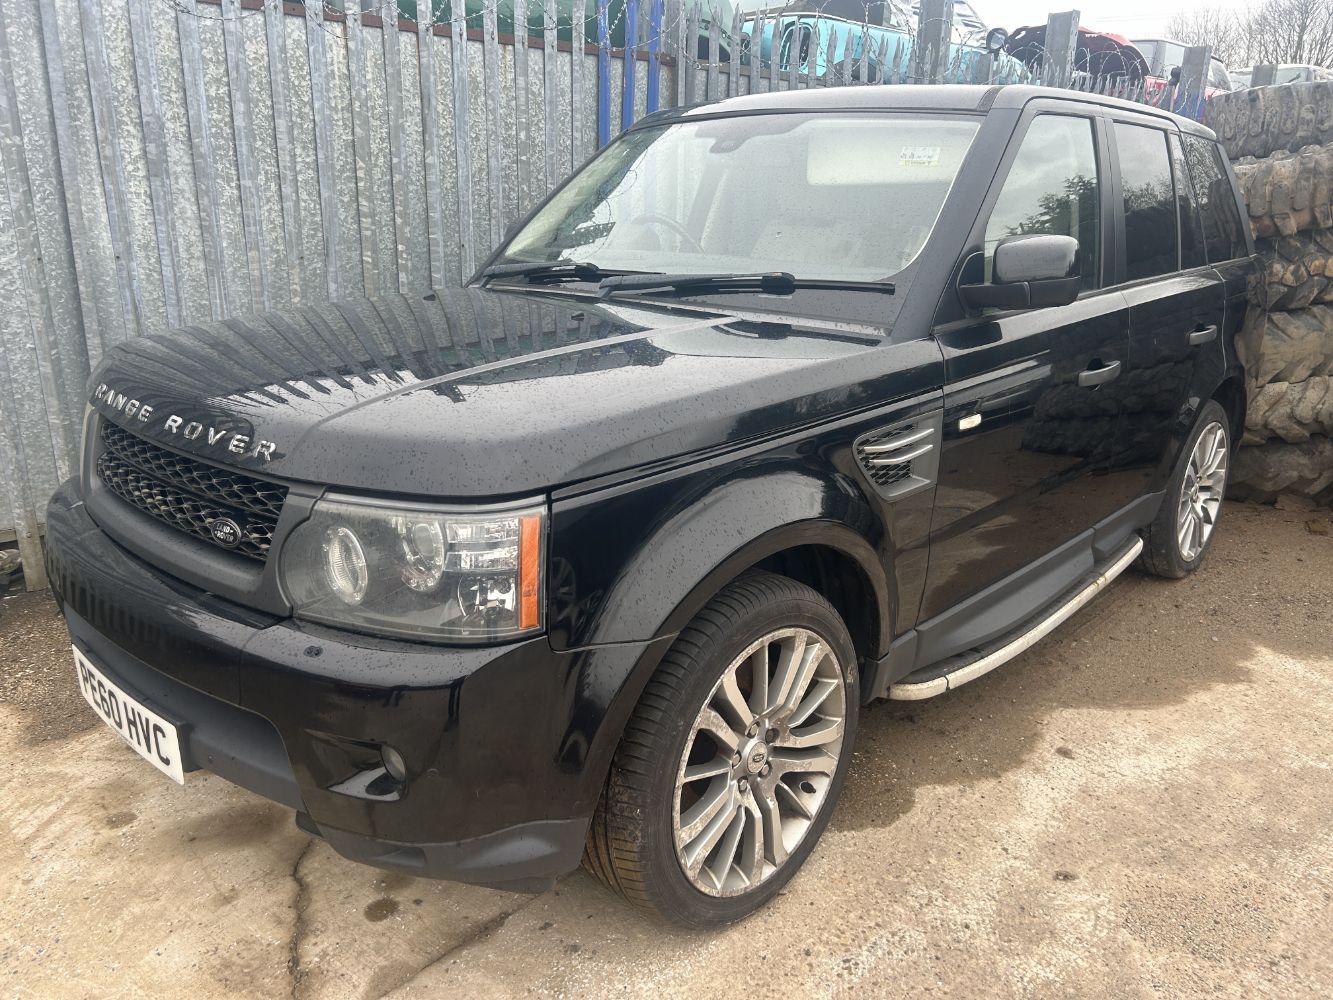 Motor Vehicle Sale | 25 x Part Exchanged/Used Motor Vehicles | Brands Include: Range Rover, Mercedes-Benz, Audi, BMW, Chrysler and more